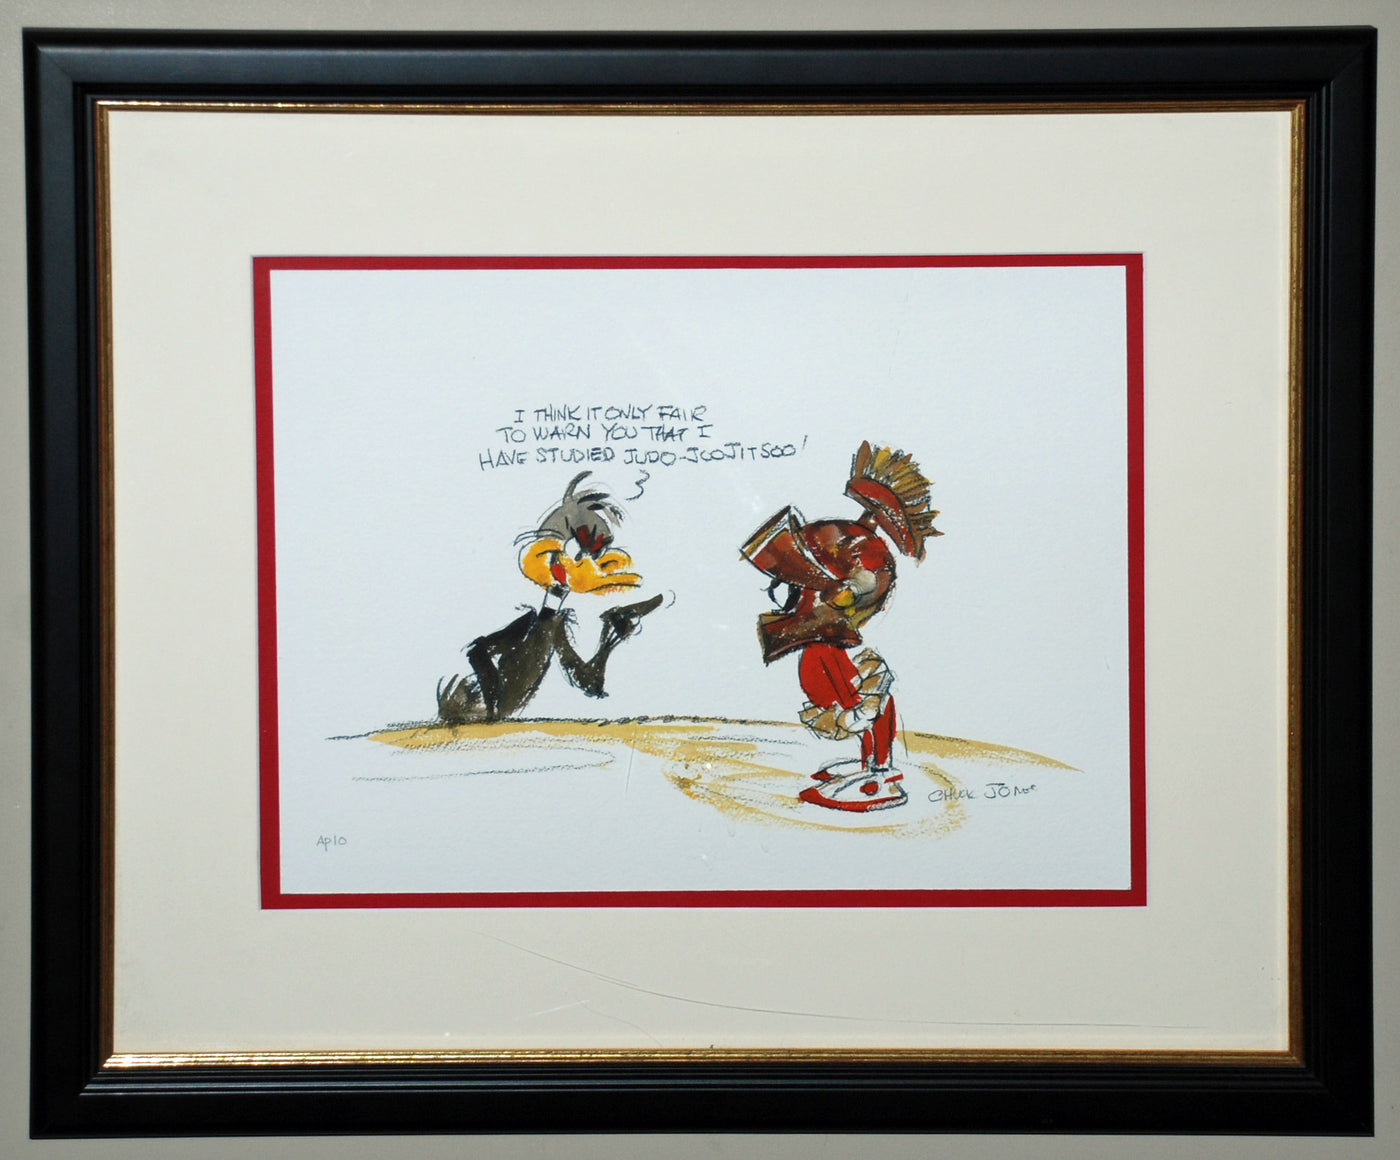 Original Warner Brothers Limited Edition Giclee Print